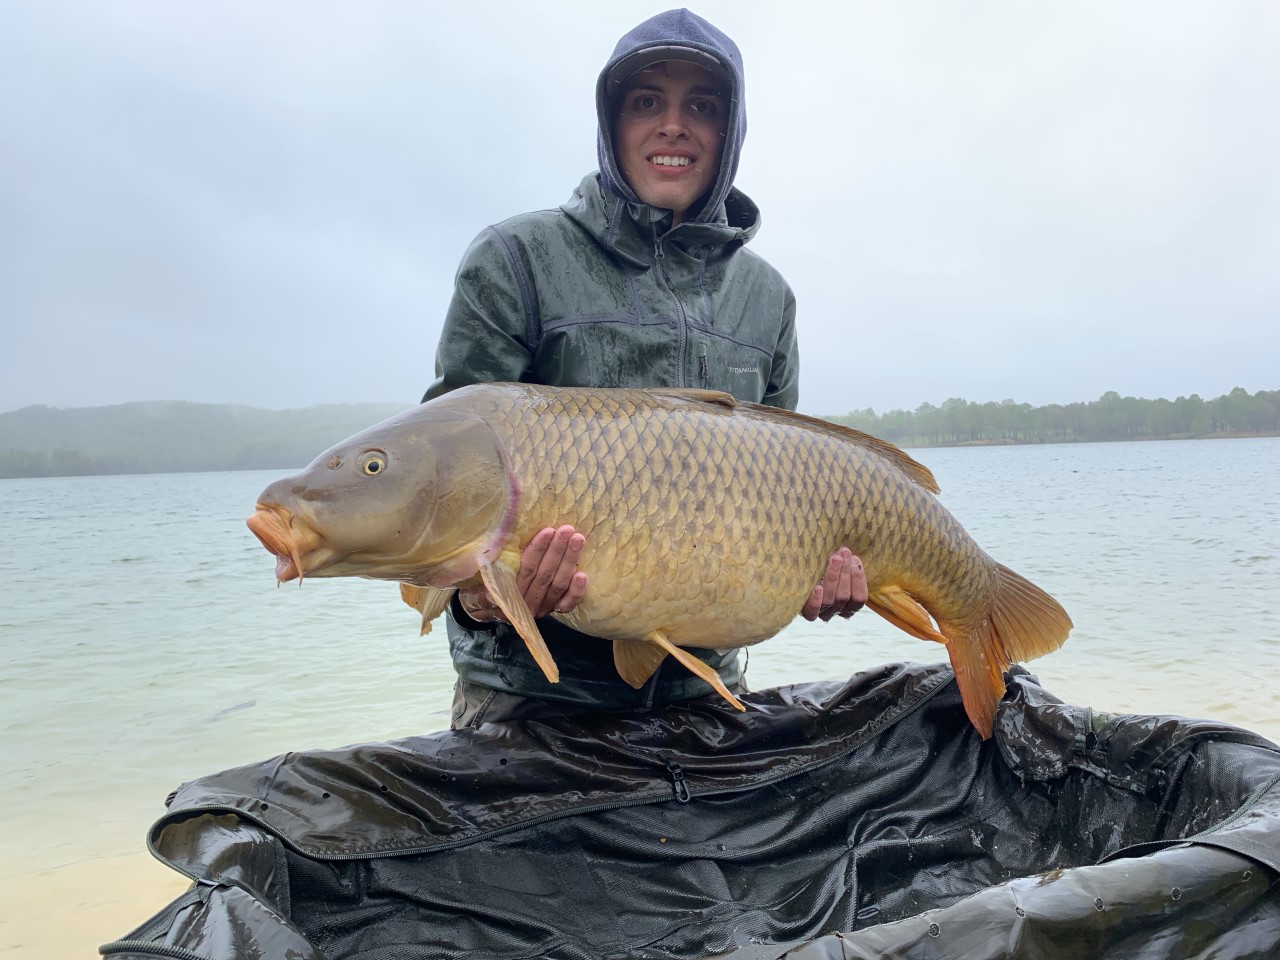 Ayden Minick caught a huge carp while on a fishing trip in West Virginia